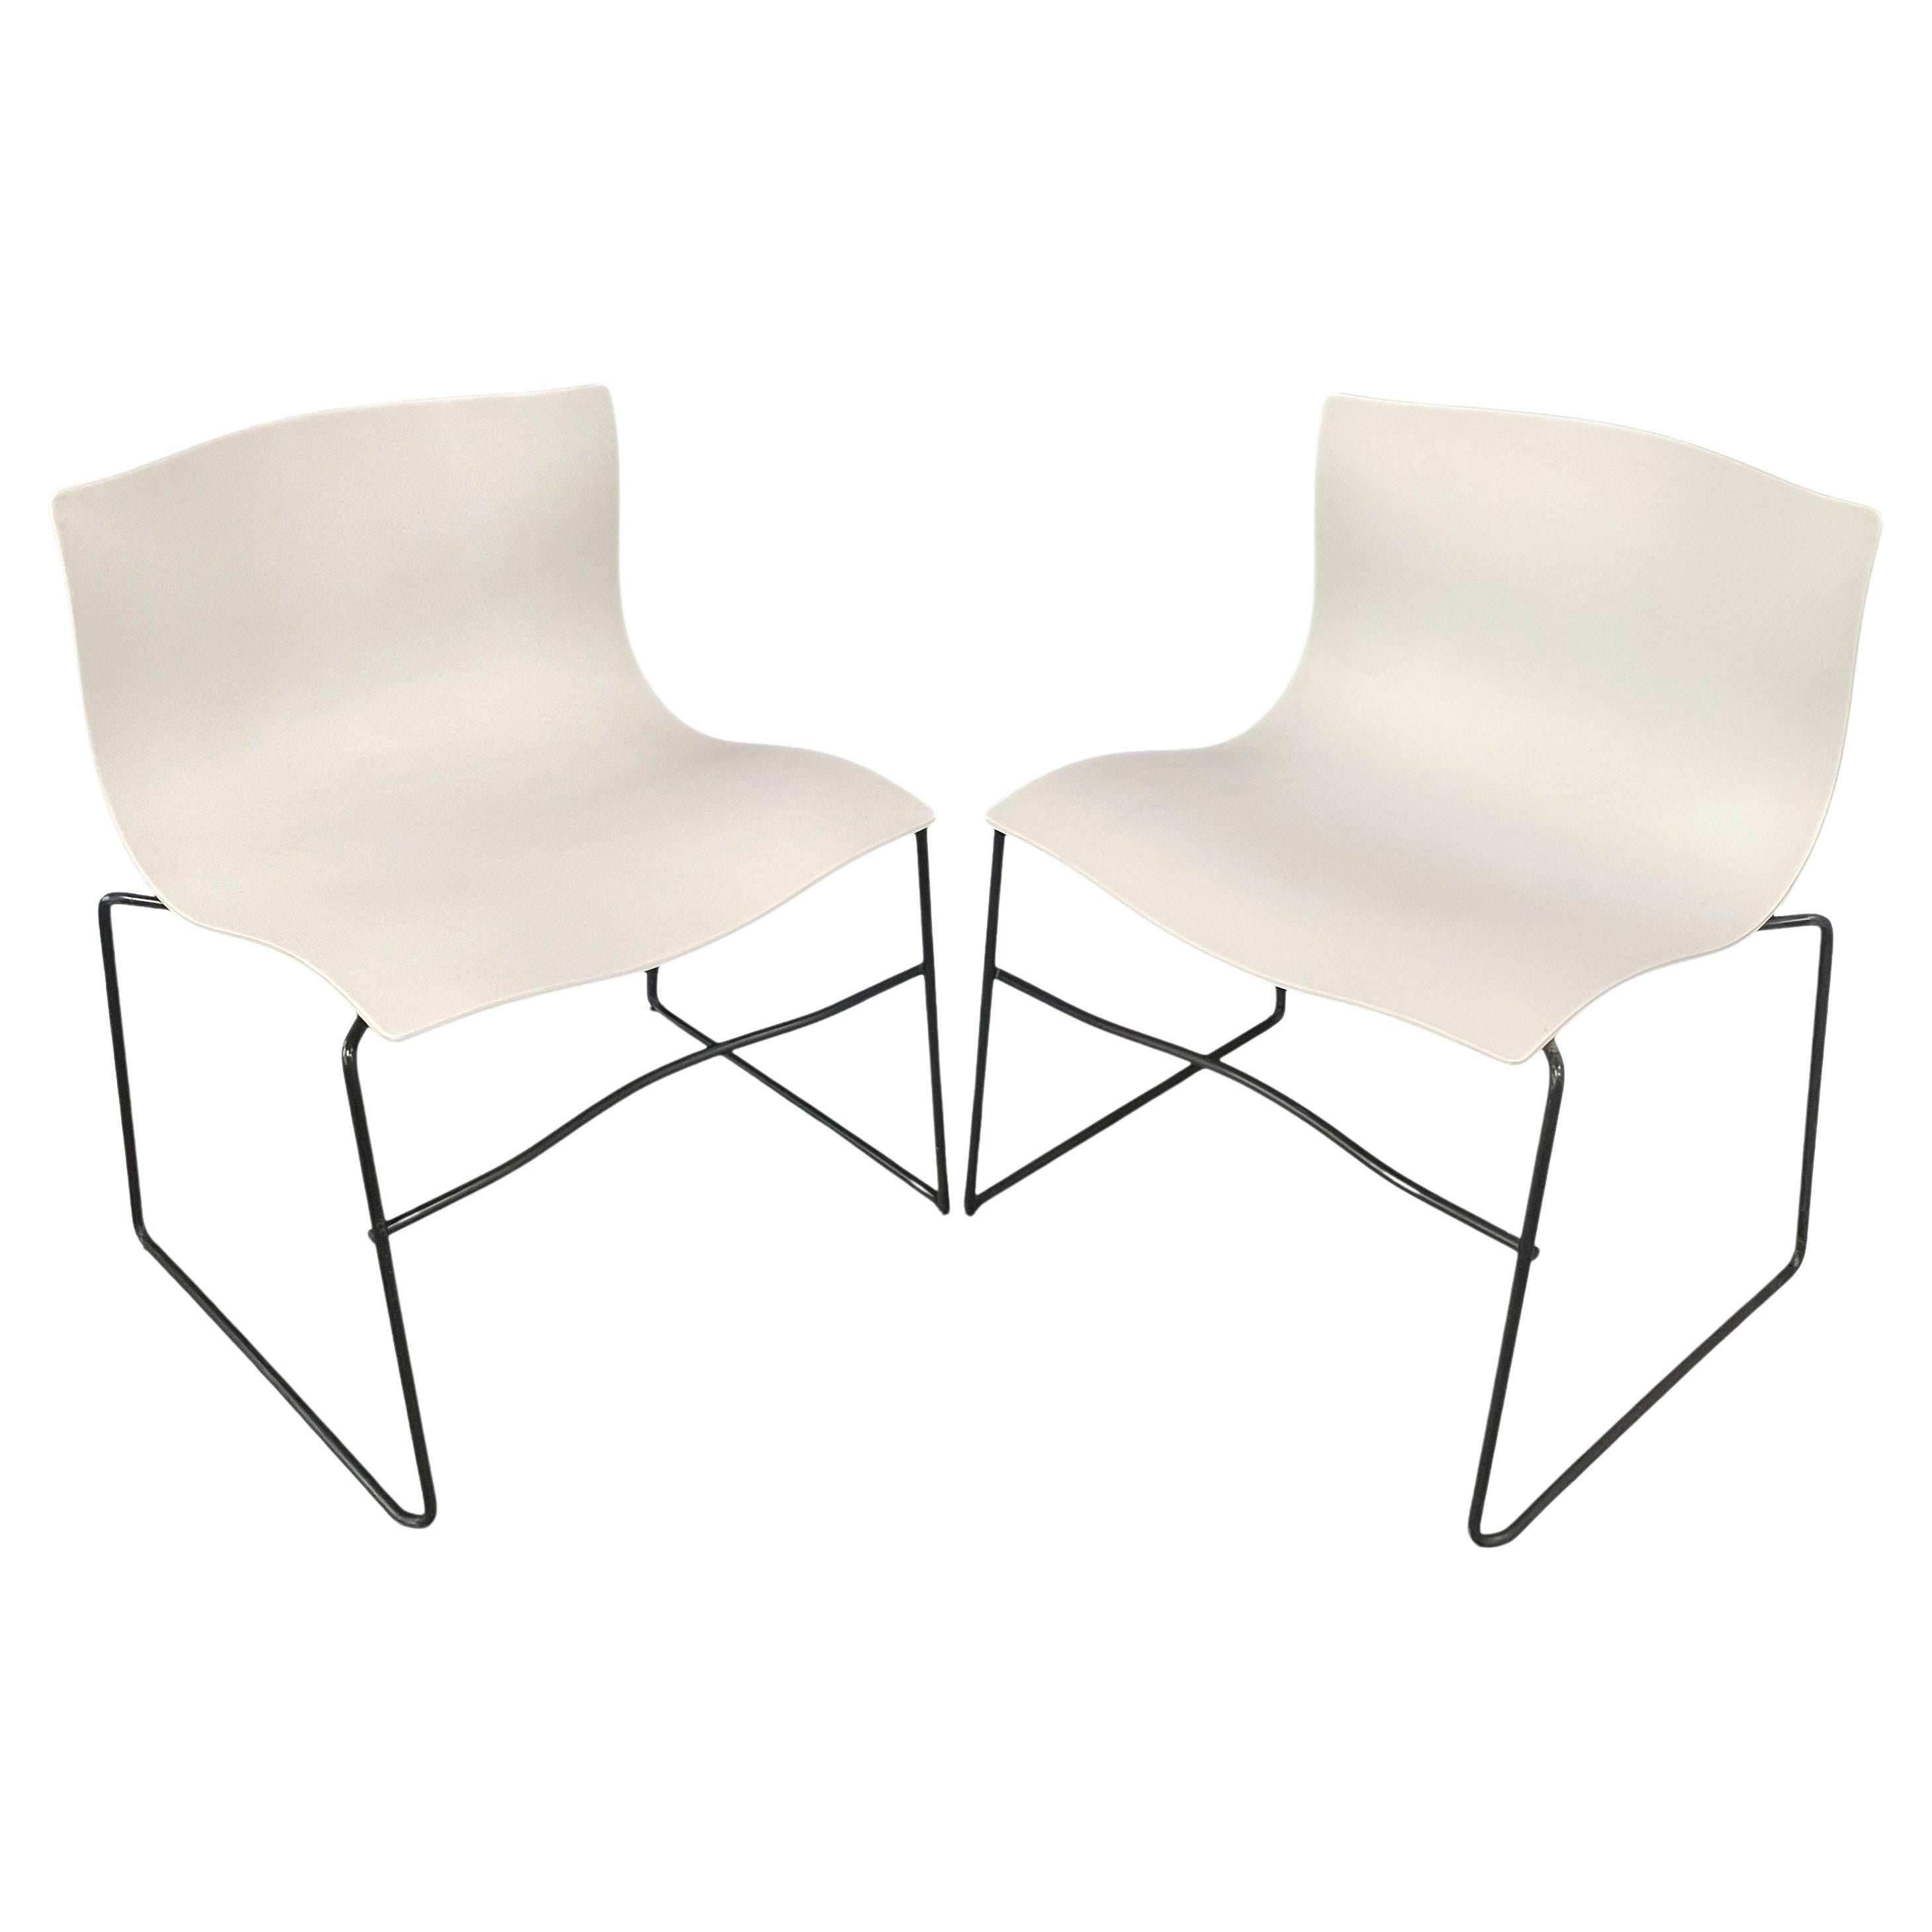 Handkerchief Chairs in White by Massimo Vignelli for Knoll Post Modern a Pair